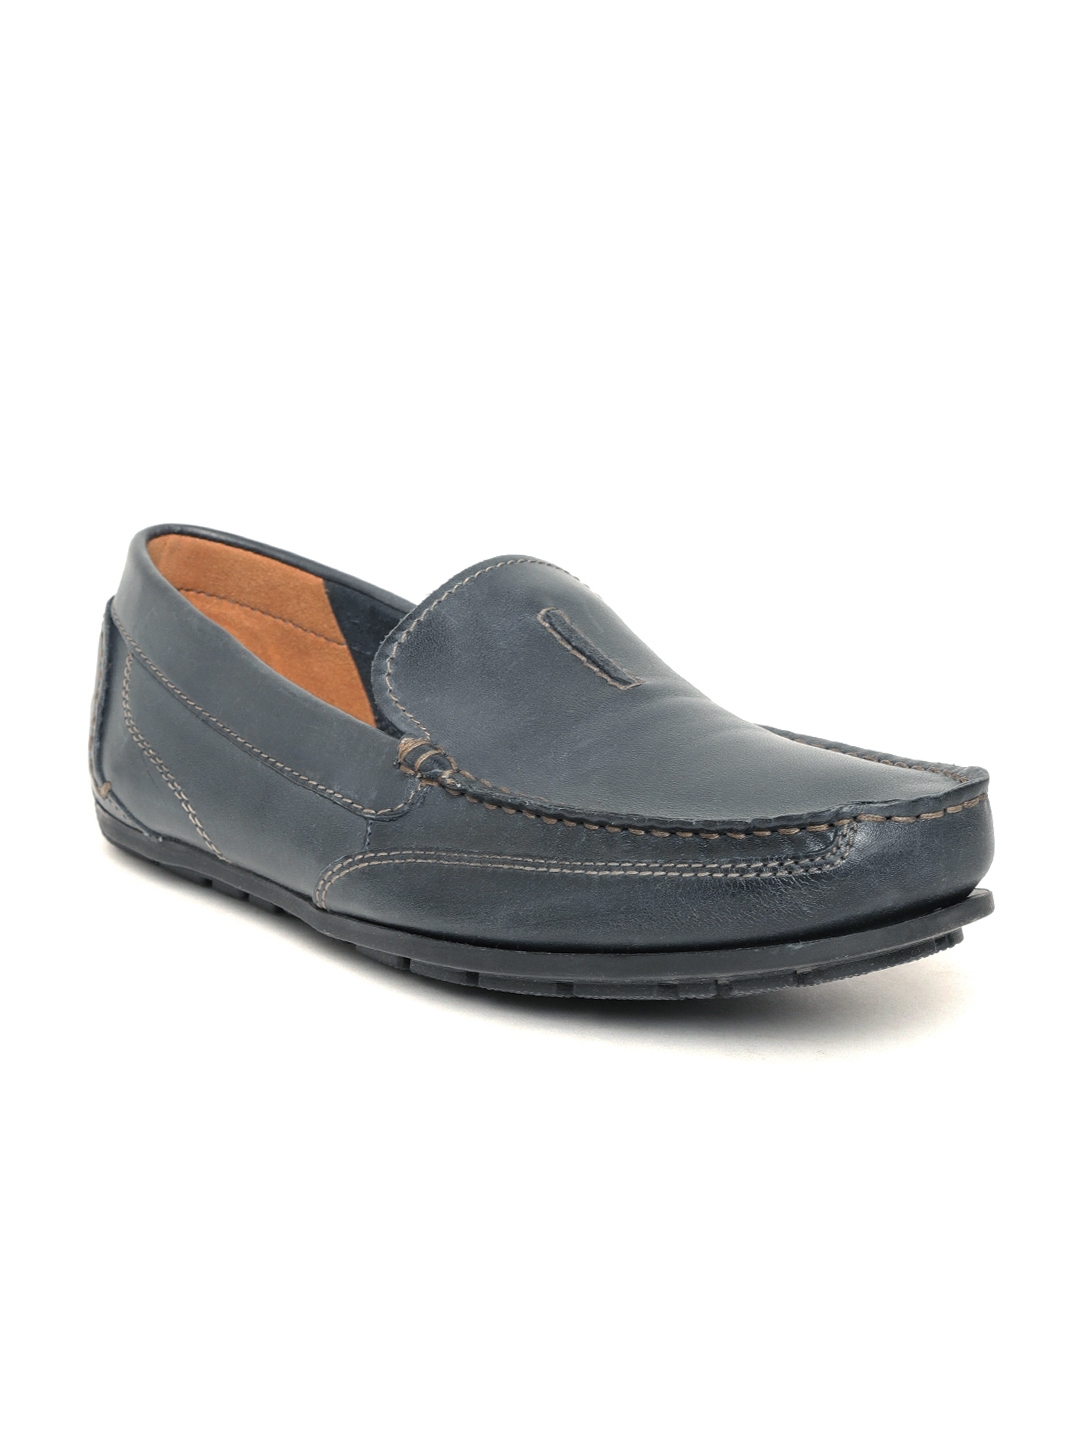 Buy Clarks Men Navy Leather Driving Shoes - Casual Shoes for Men ...